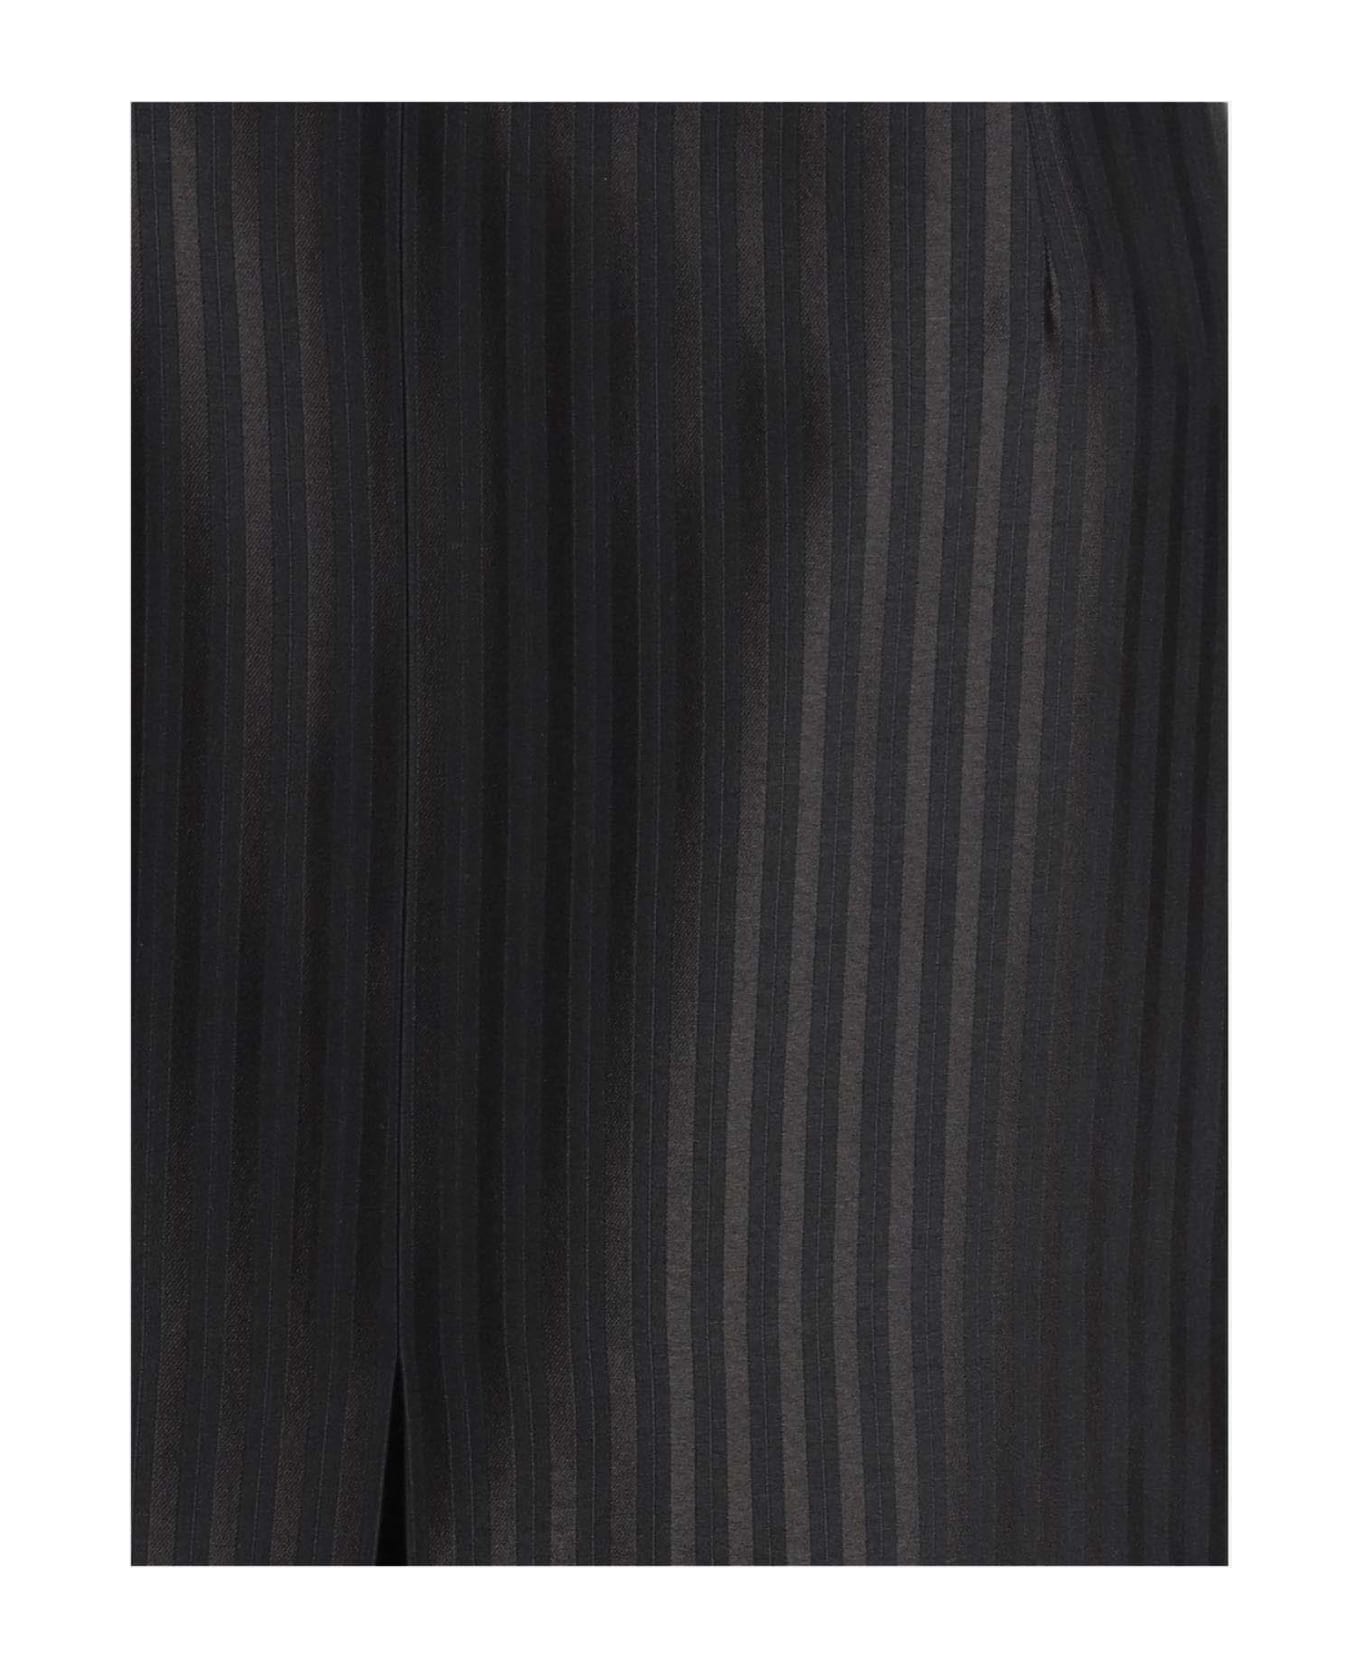 Saint Laurent Wool And Silk Skirt With Striped Pattern - Black